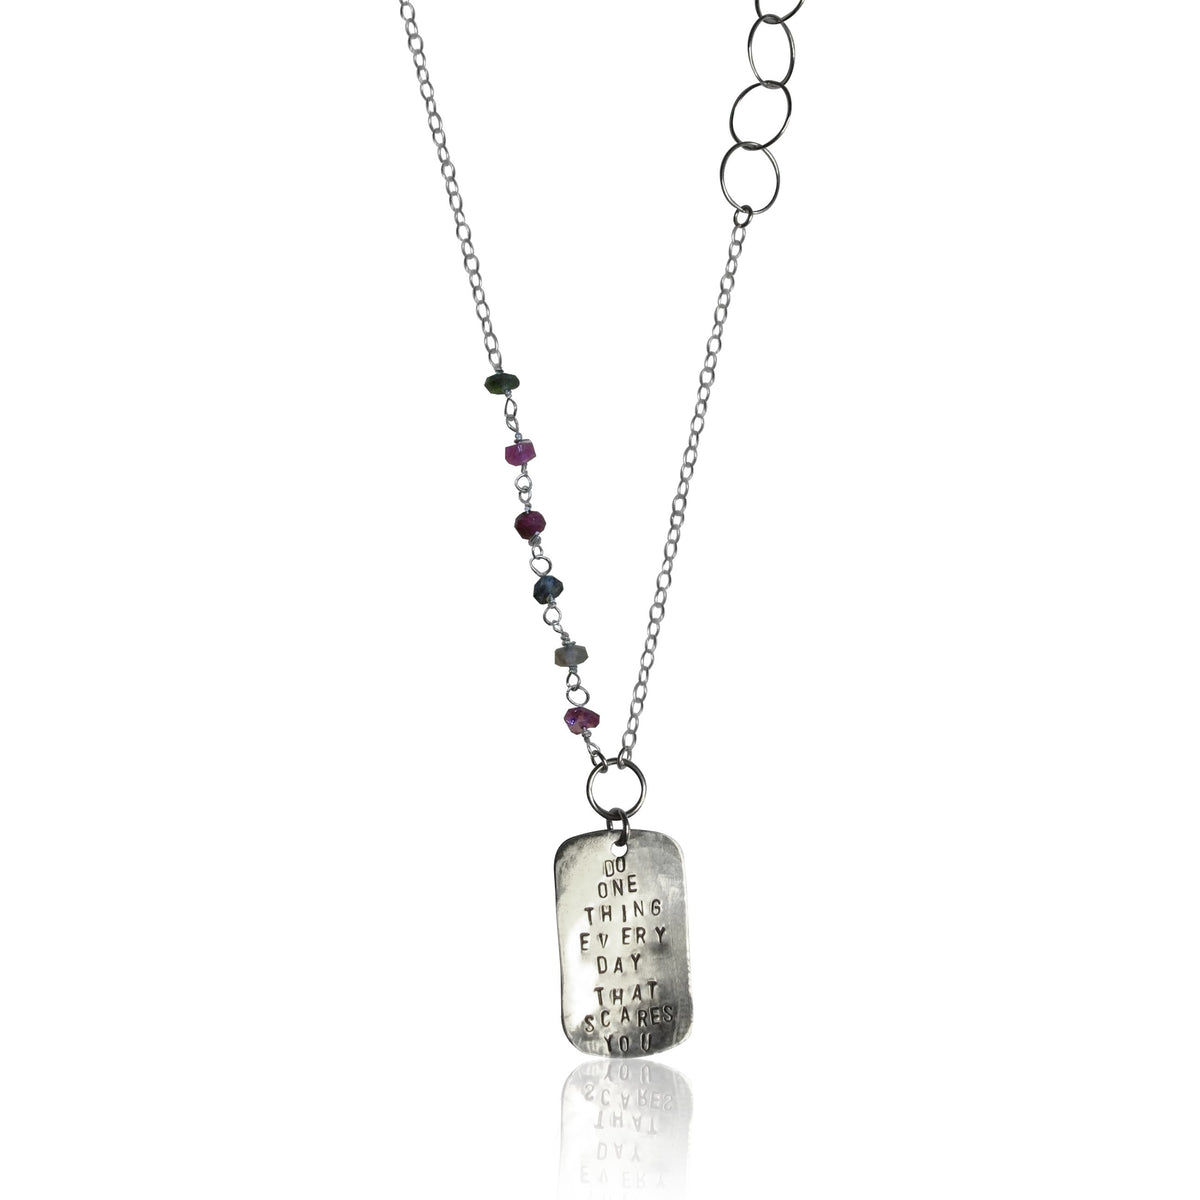 Gogh Jewelry Design's grounding necklace etched with: "DO ONE THING EVERY DAY THAT SCARES YOU"